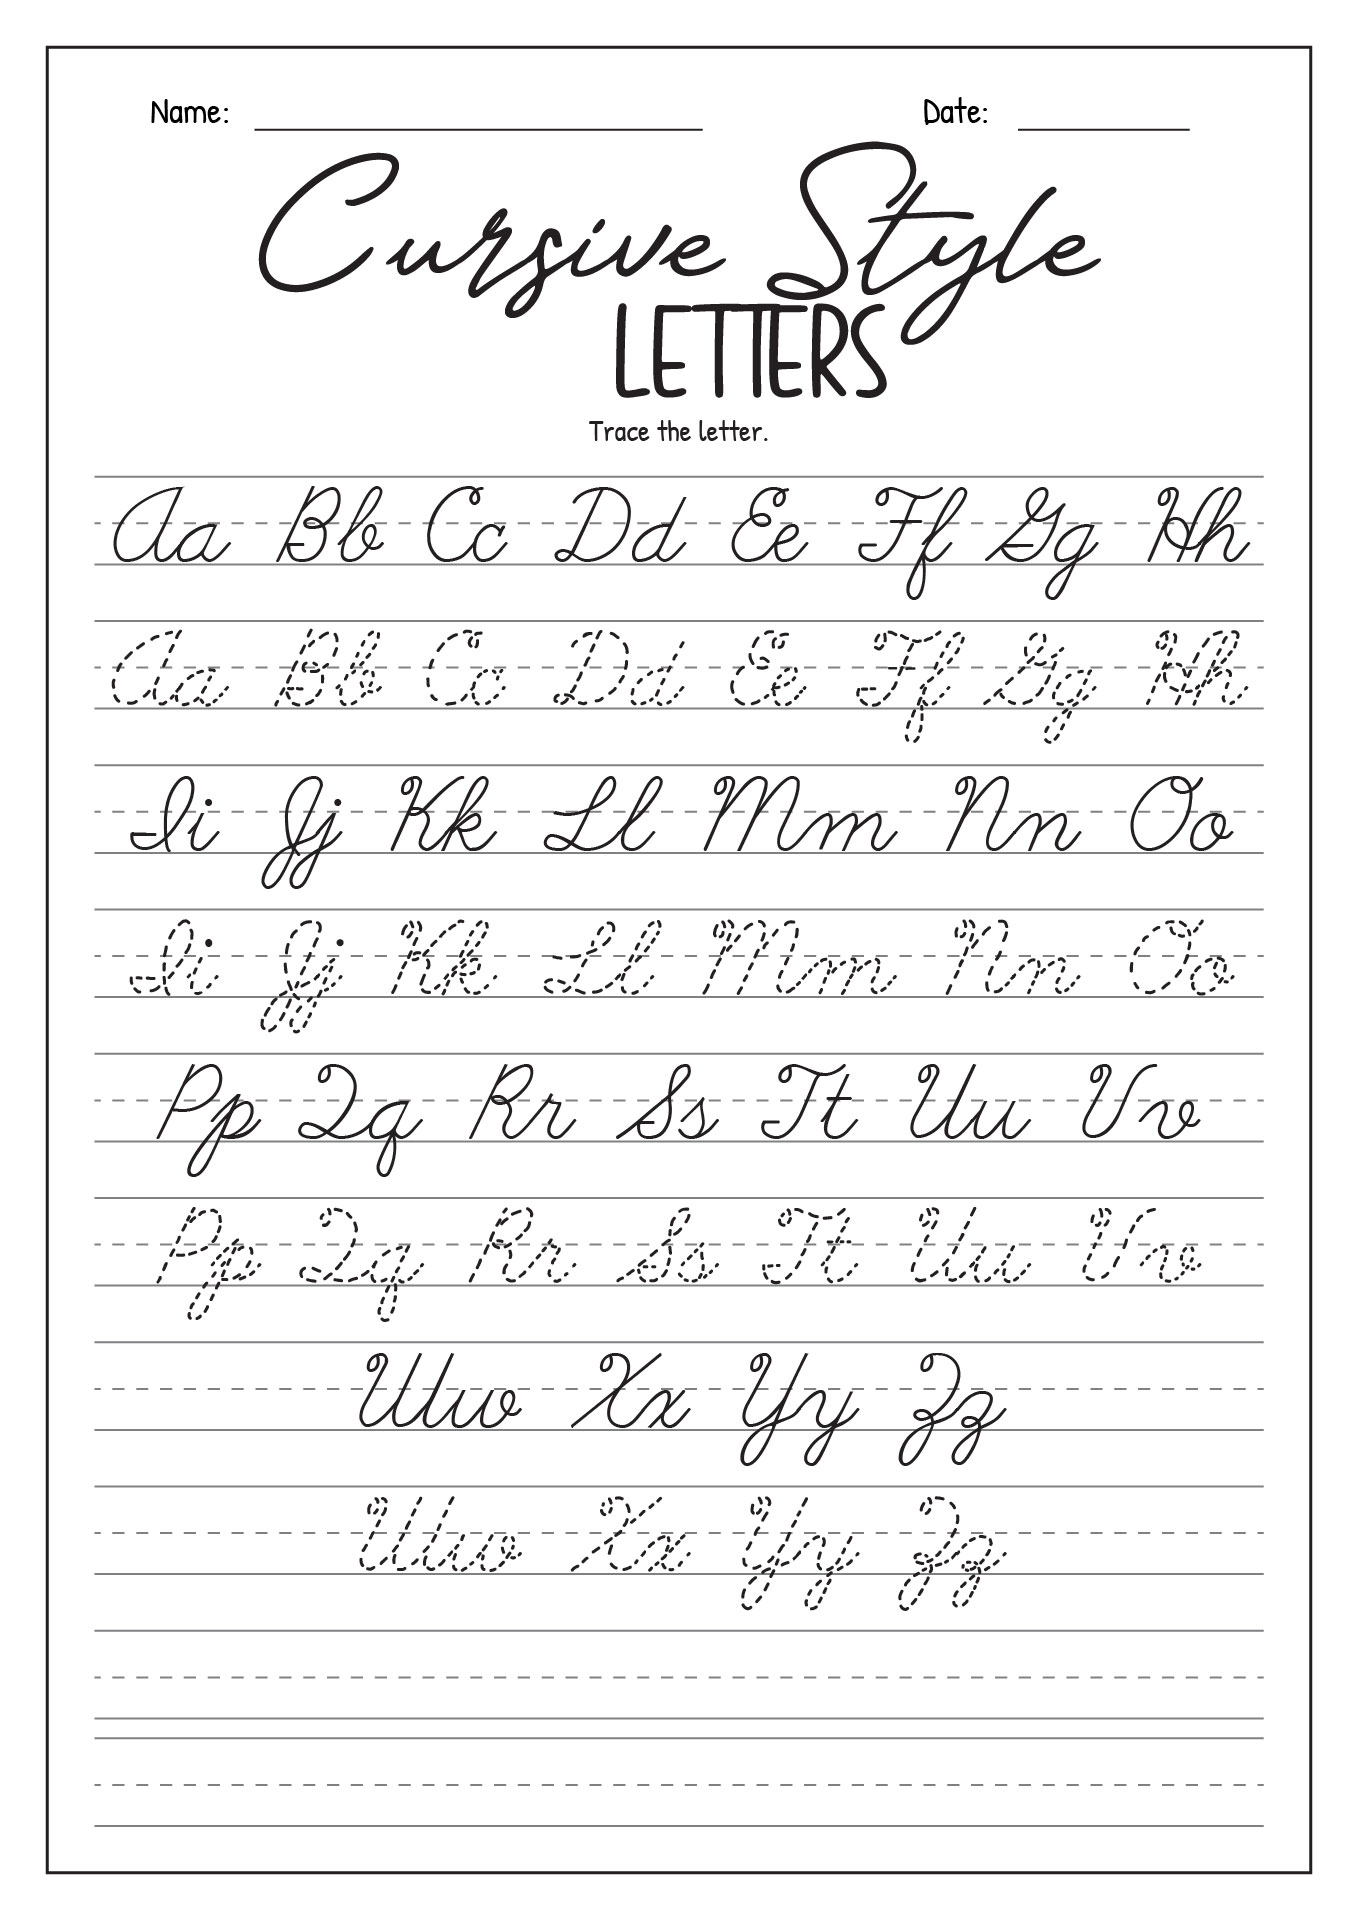 Handwriting Style Cursive Letters Image